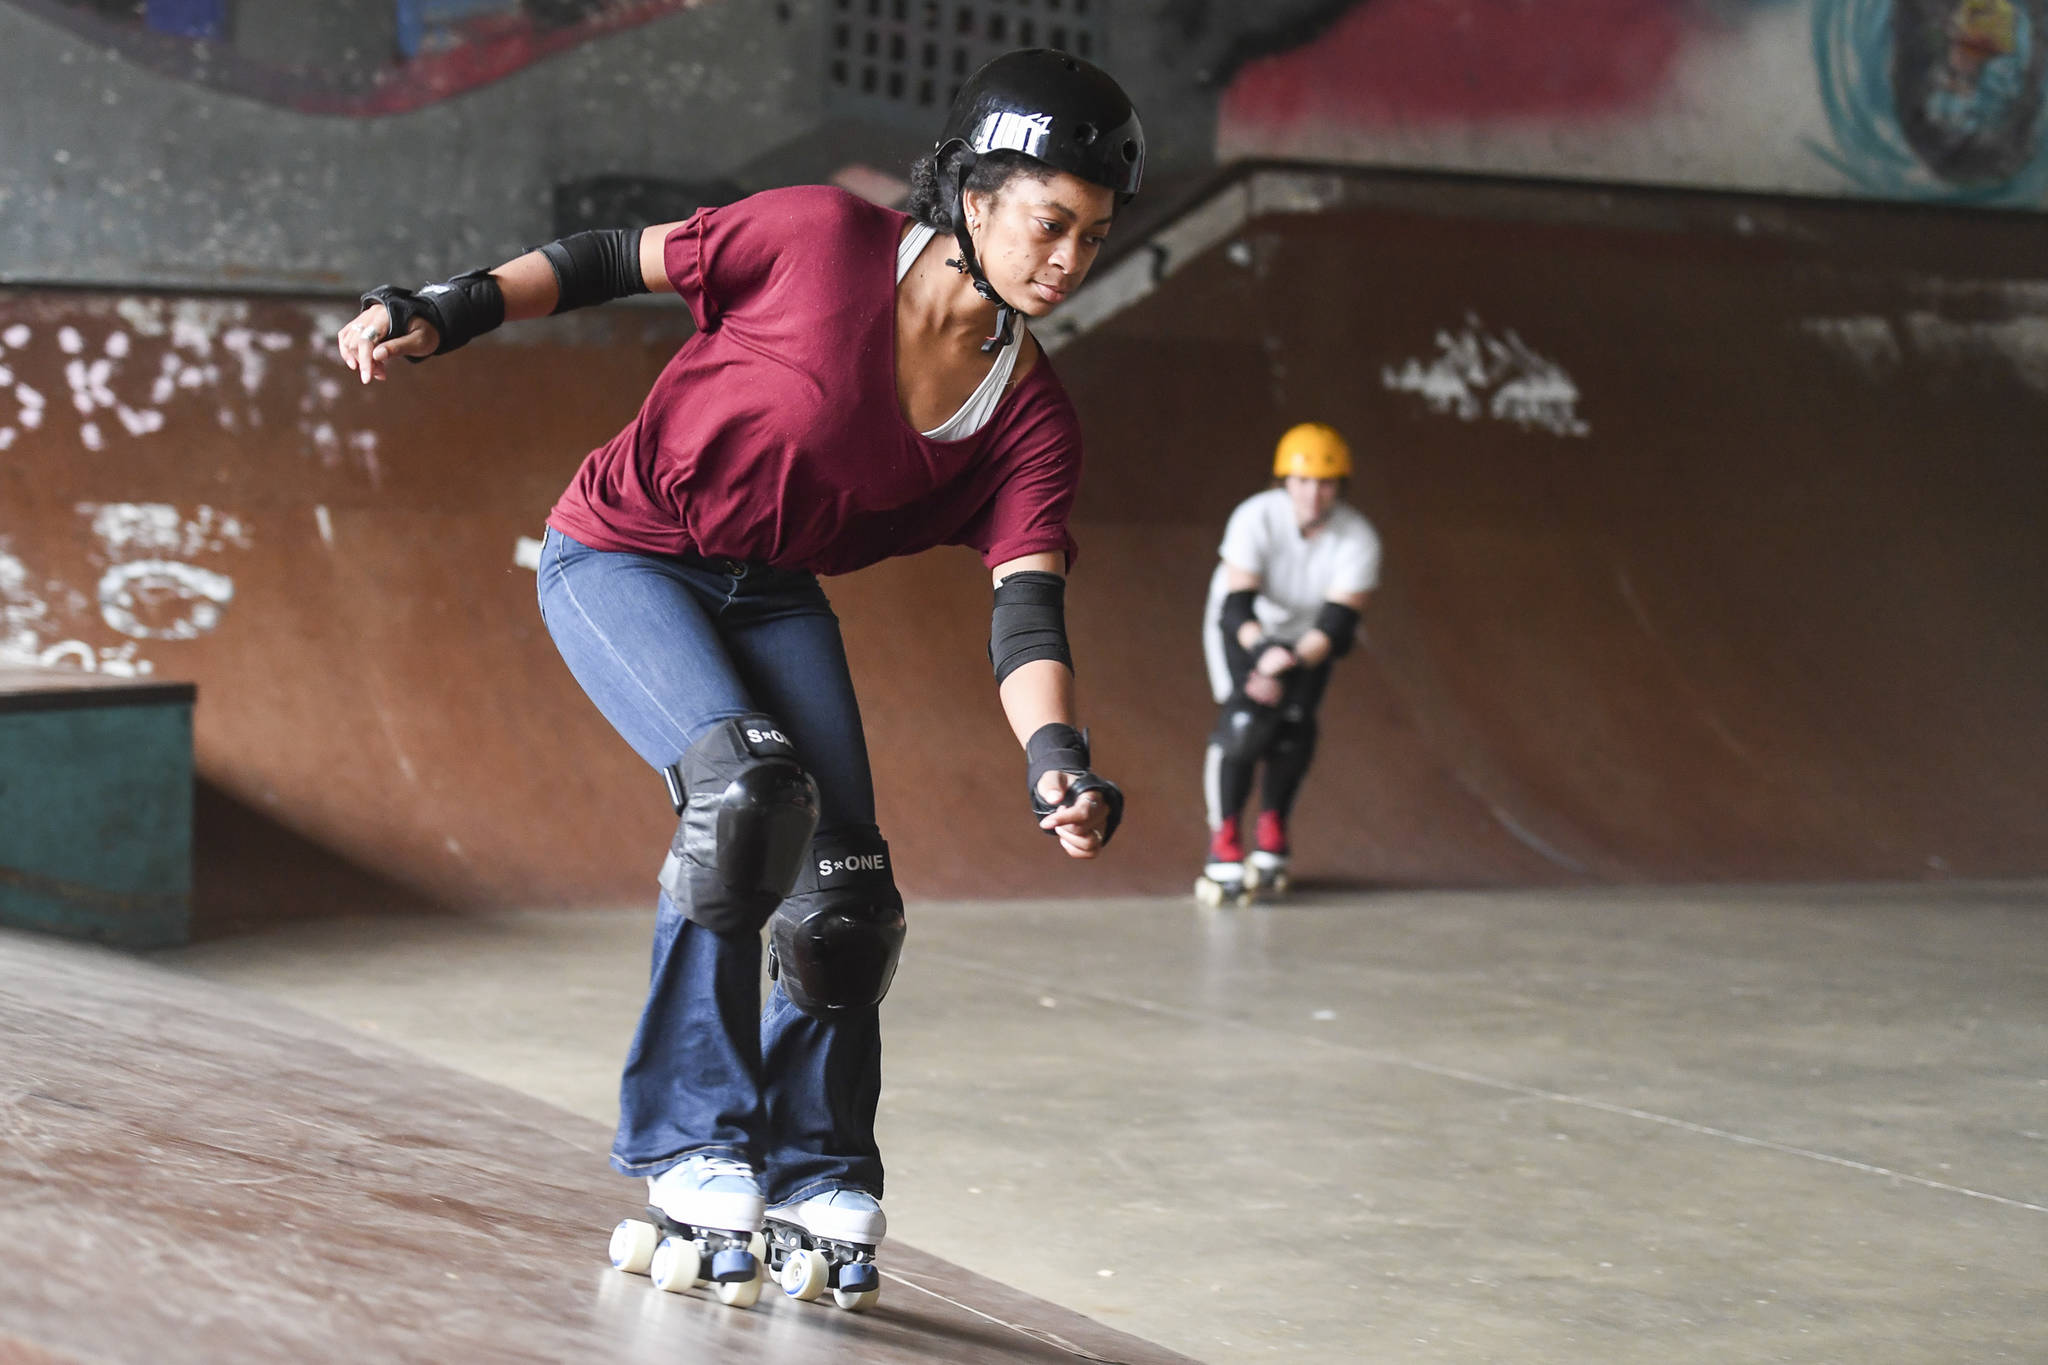 Jennifer Gross, left, and Shabadrang Khalsa, who skate with the Juneau Rollergirls, get their daily skate in at the Pipeline Skate Park on Friday, Oct. 11, 2019. The two are skating every day as part of a challenge to every day for a year. (Michael Penn | Juneau Empire)